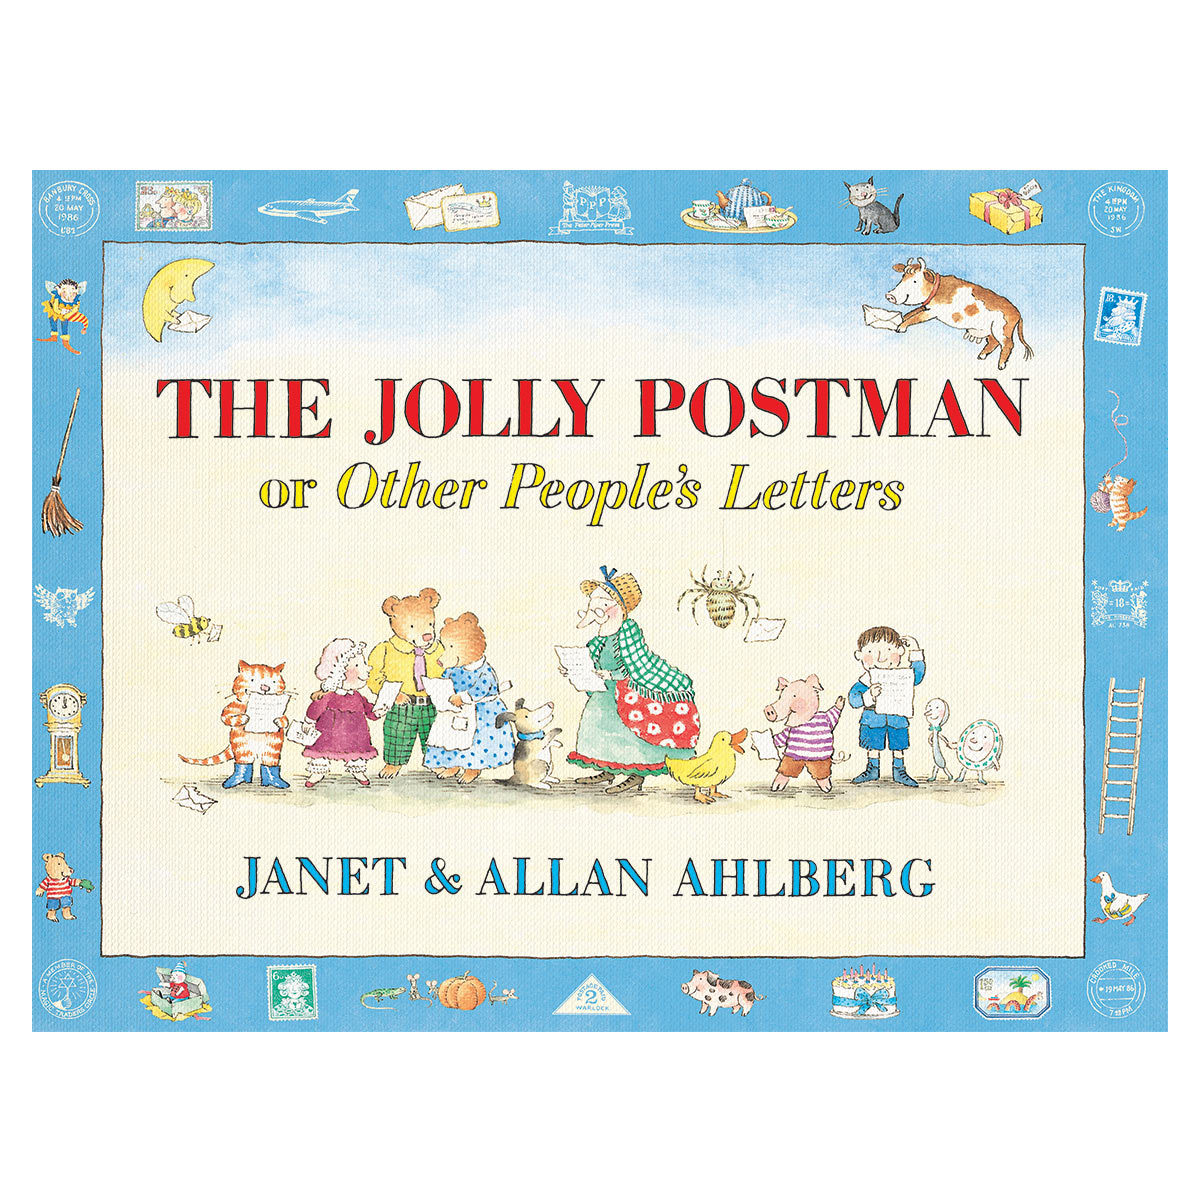 Other　Jolly　Or　Years)　(3+　C...　Peoples　Postman　The　Letters